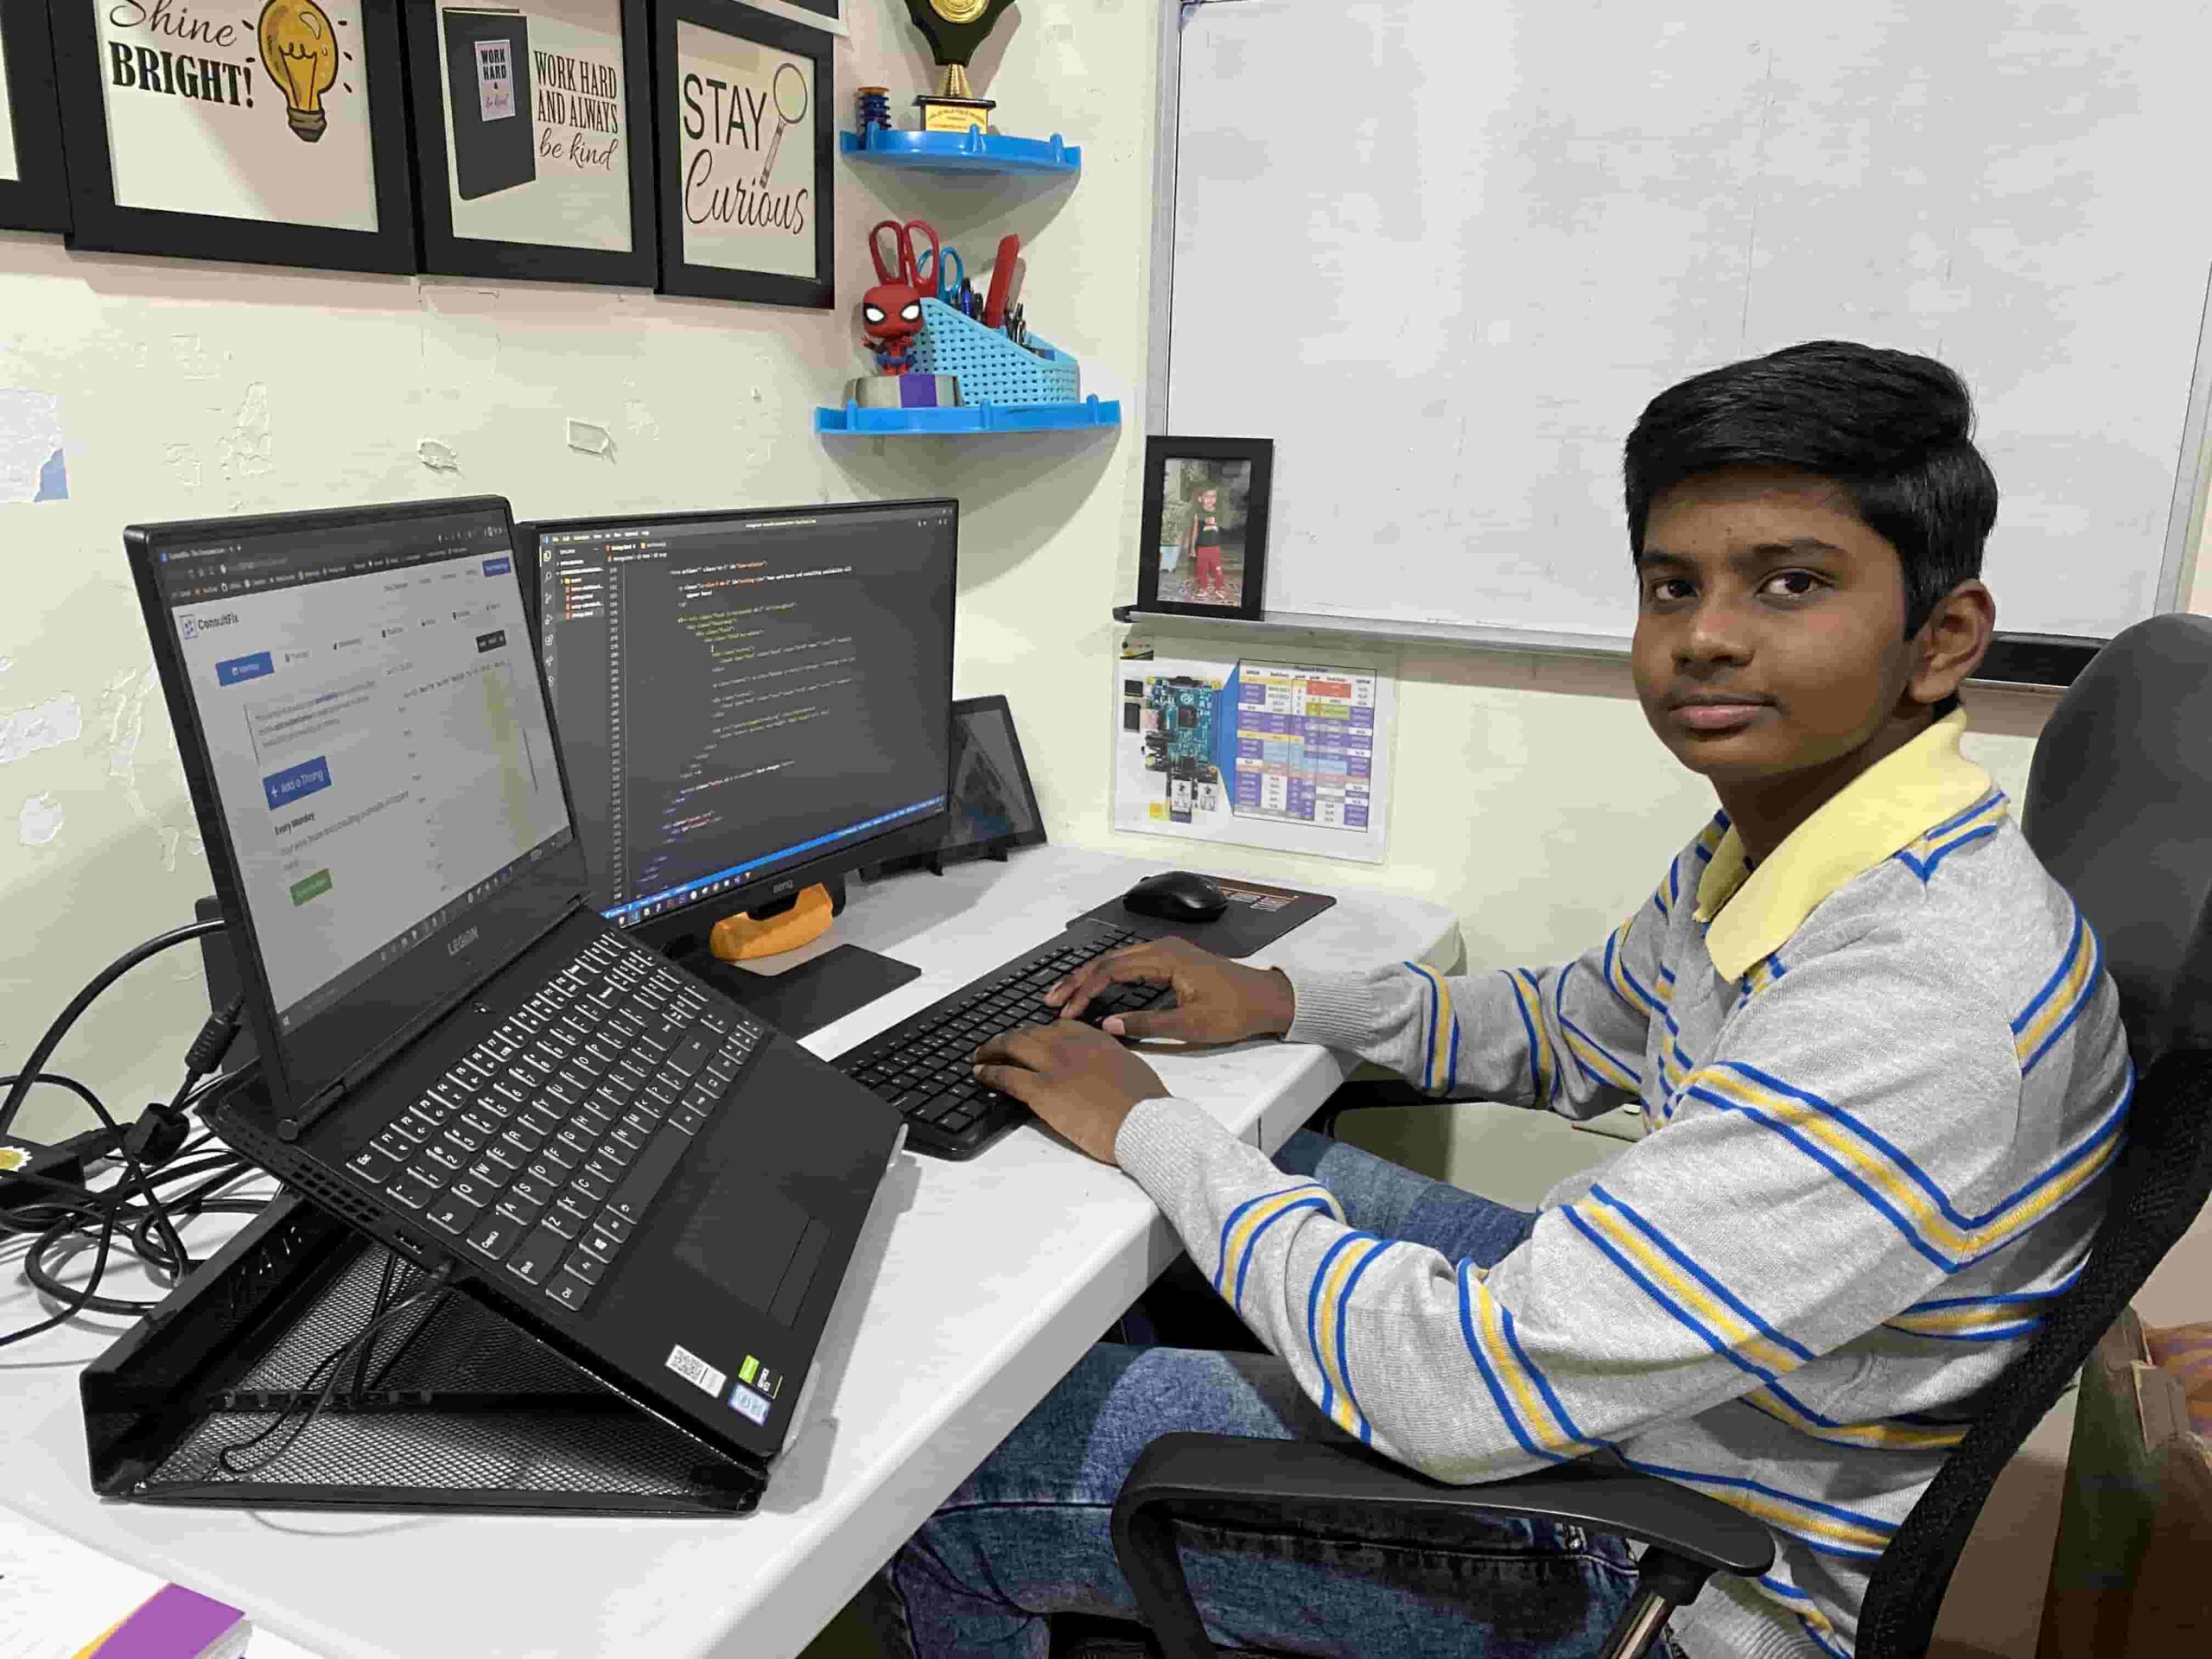 Hemesh started building devices at 12